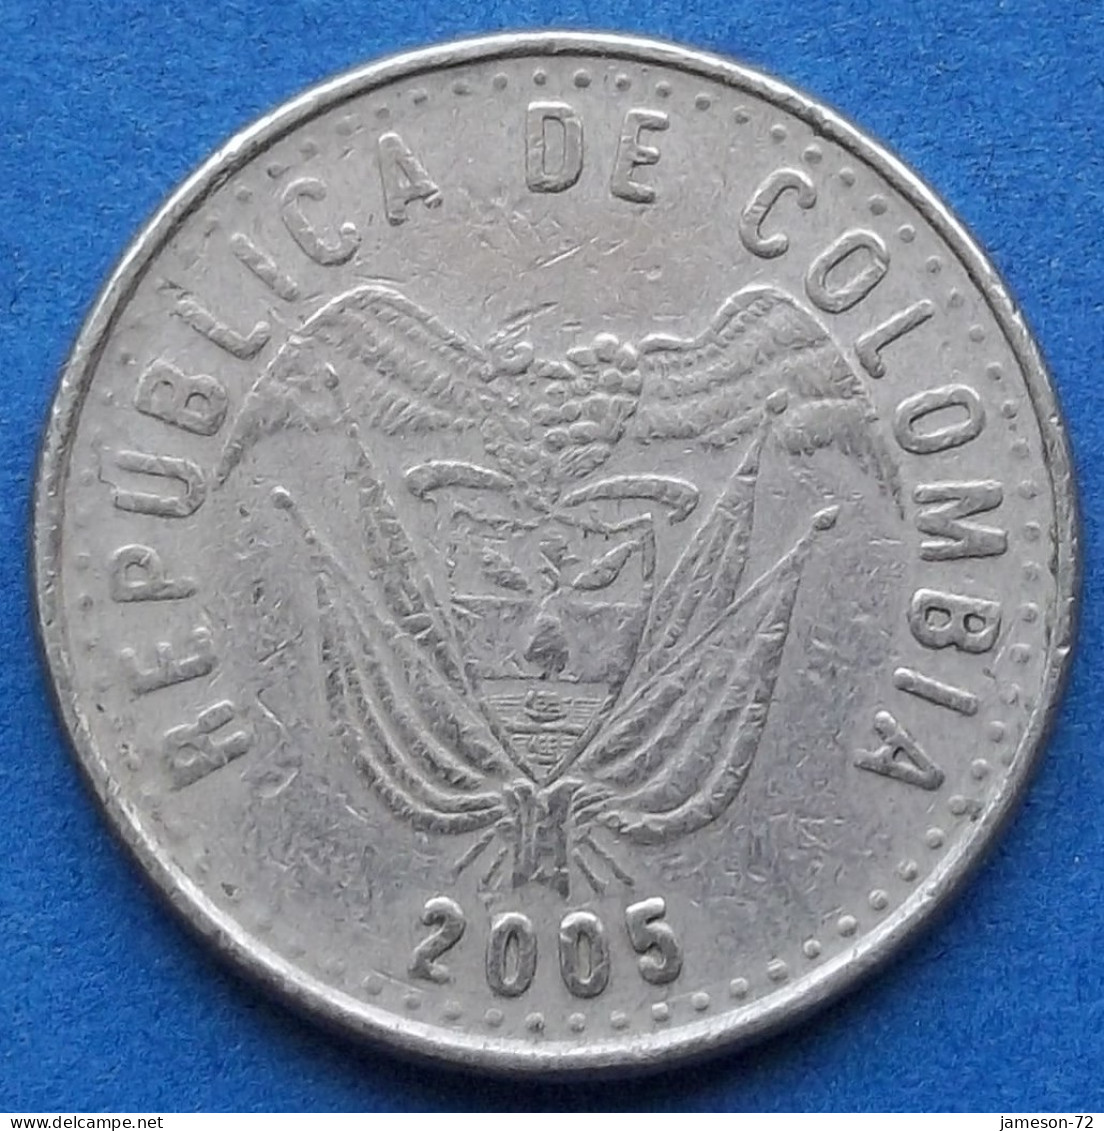 COLOMBIA - 50 Pesos 2005 KM# 283.2 Republic - Edelweiss Coins - Colombia